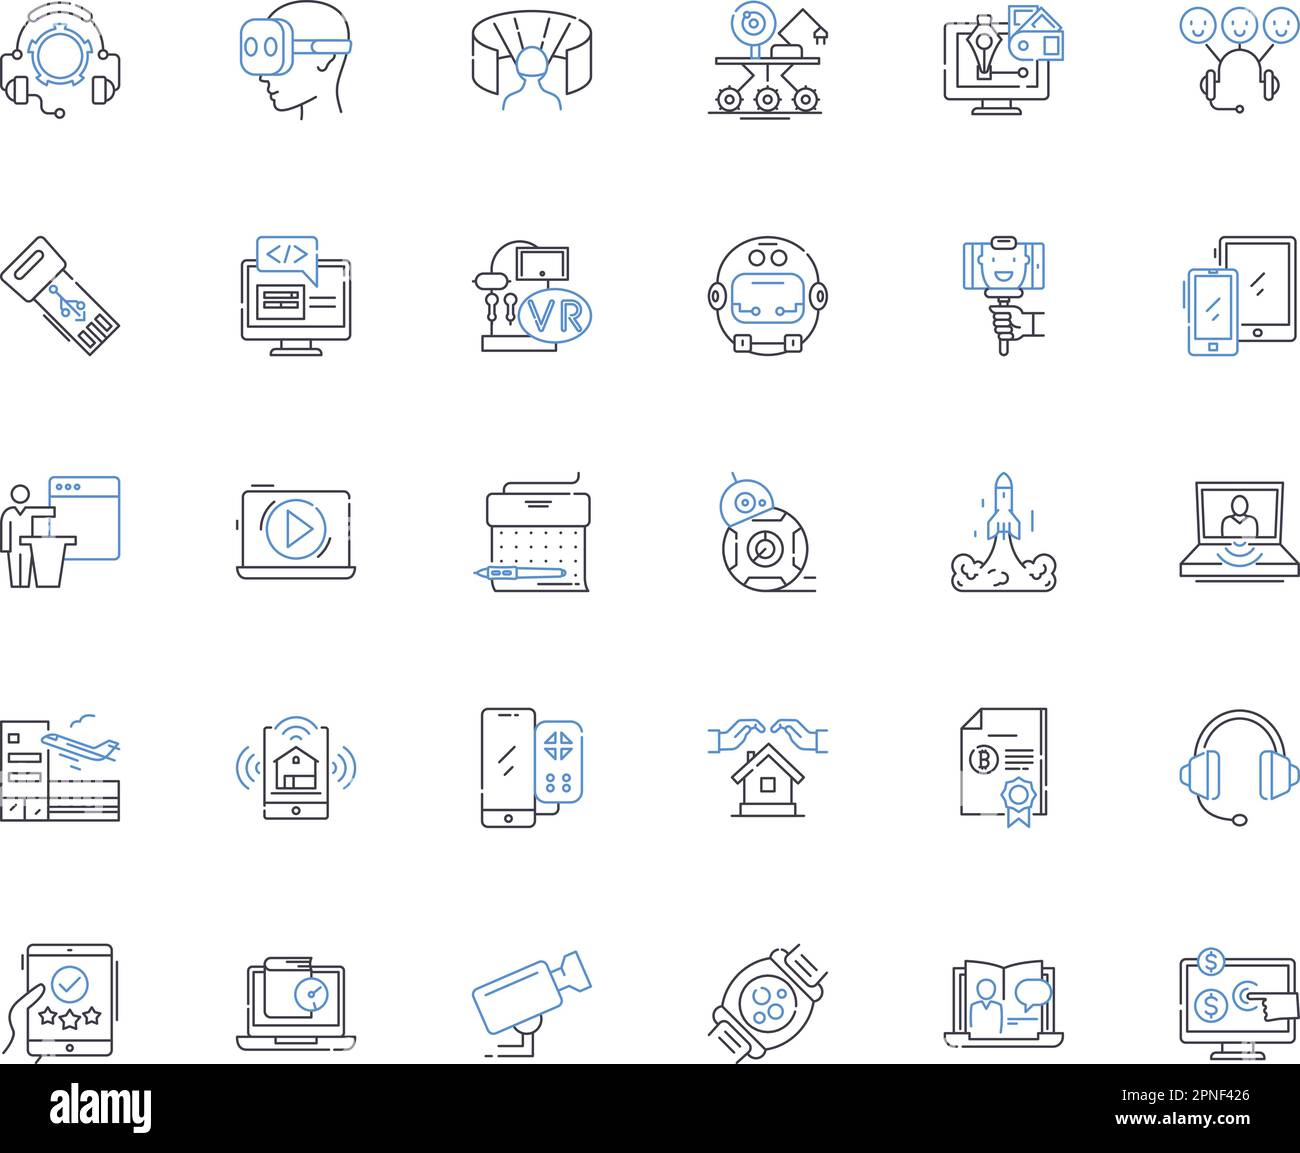 Digital fabrication line icons collection. D Printing, Laser Cutting, Milling, Prototyping, Additive Manufacturing, CNC, Fabrication vector and linear Stock Vector